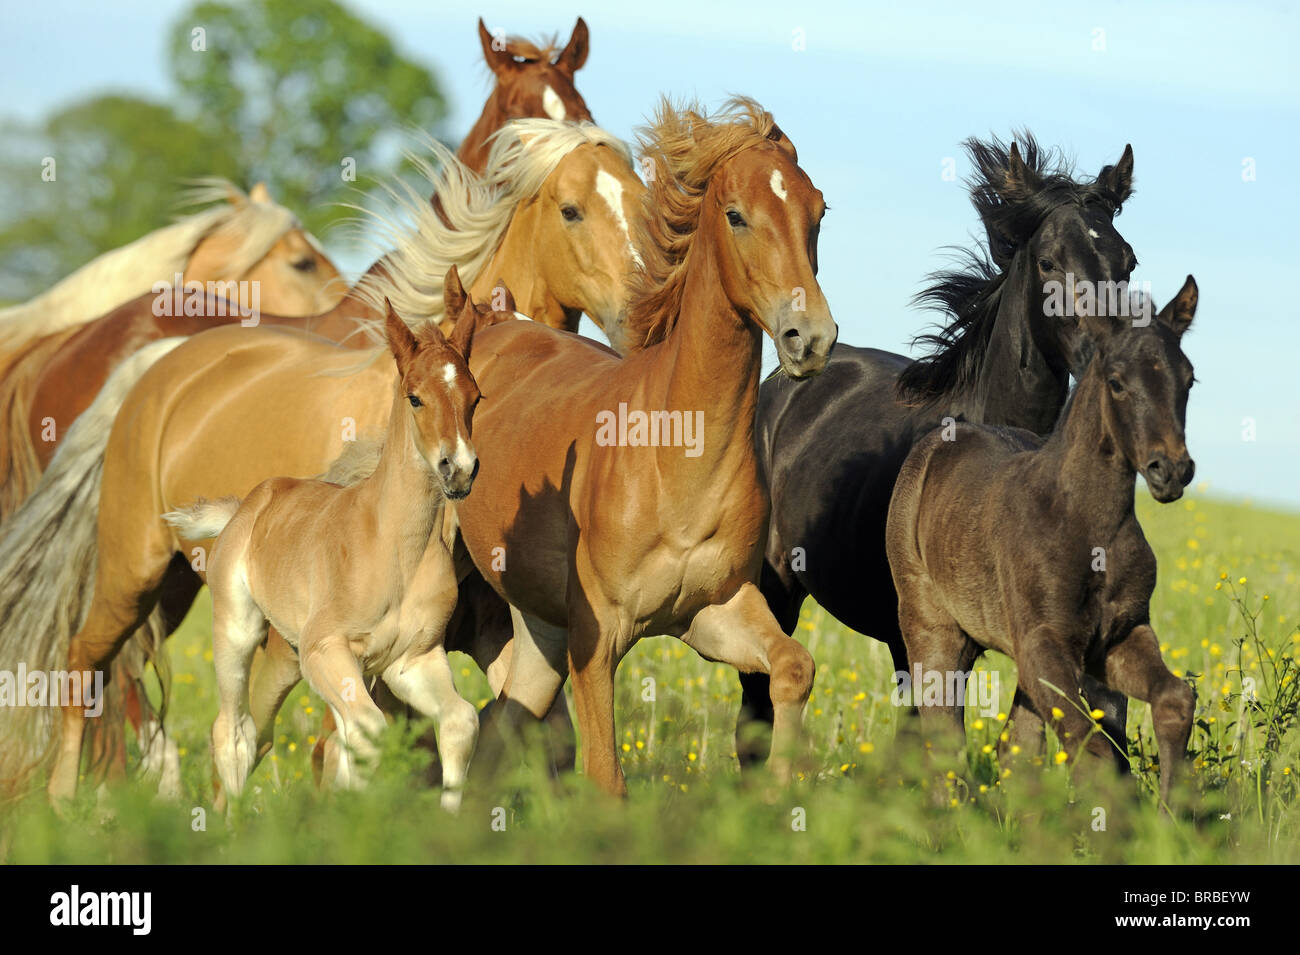 American Saddlebred und Tennessee Walking Horse (Equus ferus caballus), mixed herd of mares and foals in a gallop on a meadow. Stock Photo